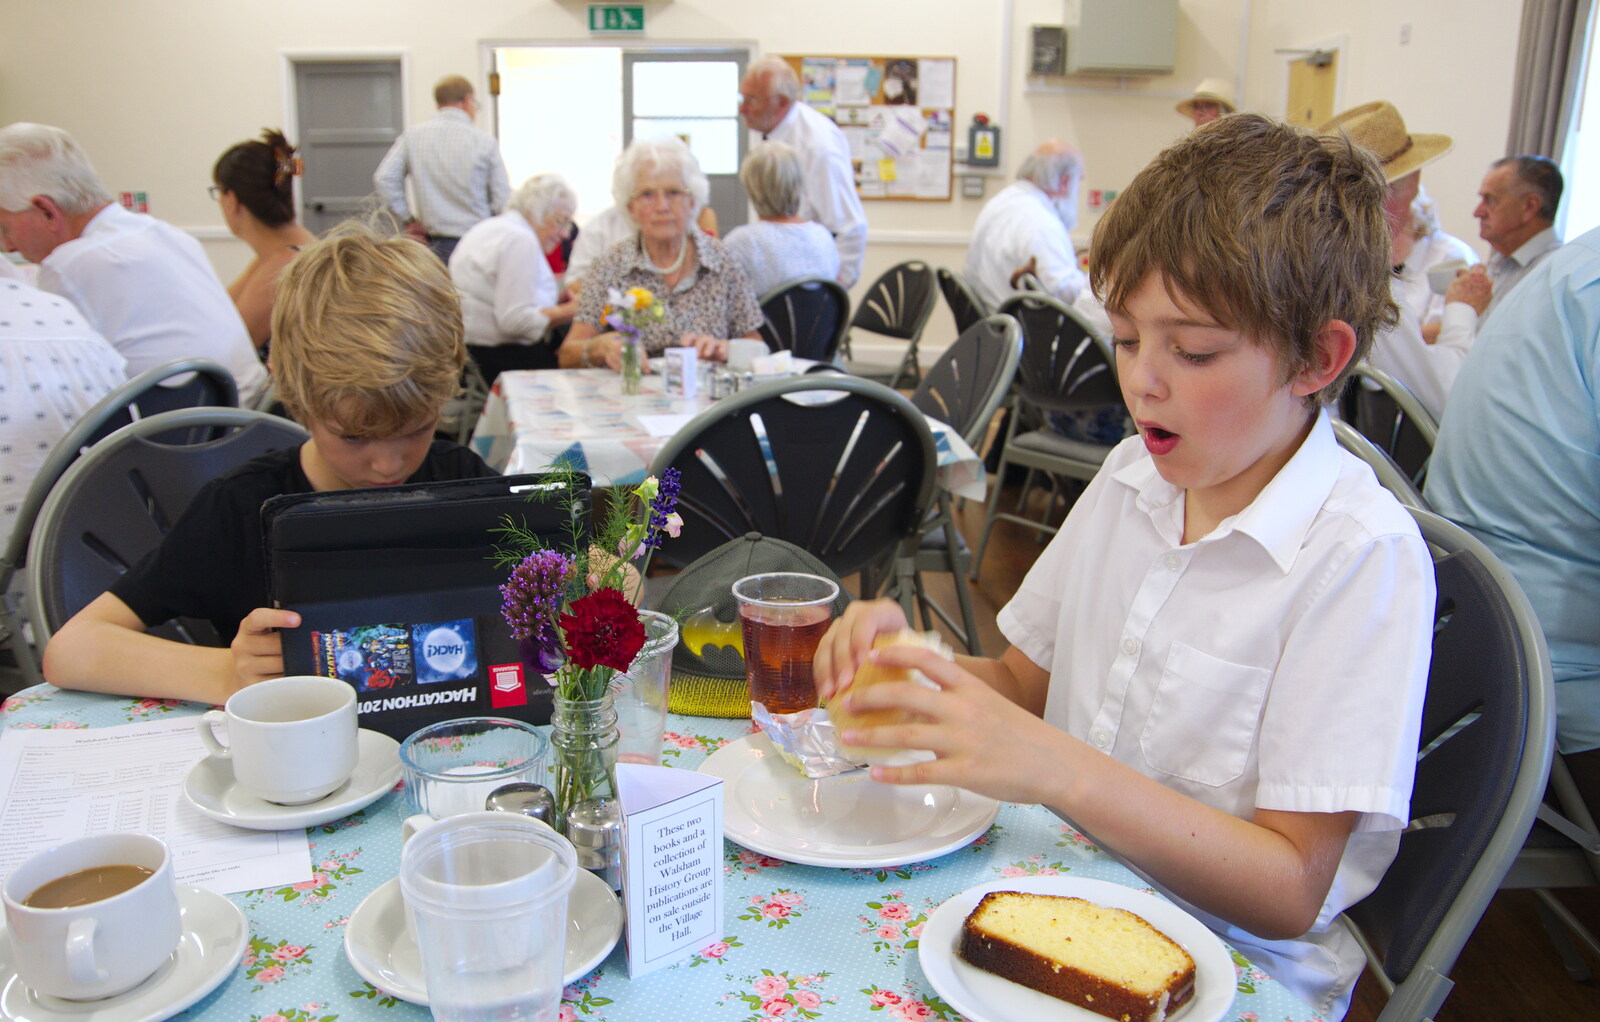 Fred's got cake; Harry's got a tablet from The Gislingham Silver Band at Walsham Le Willows, Suffolk - 26th August 2019